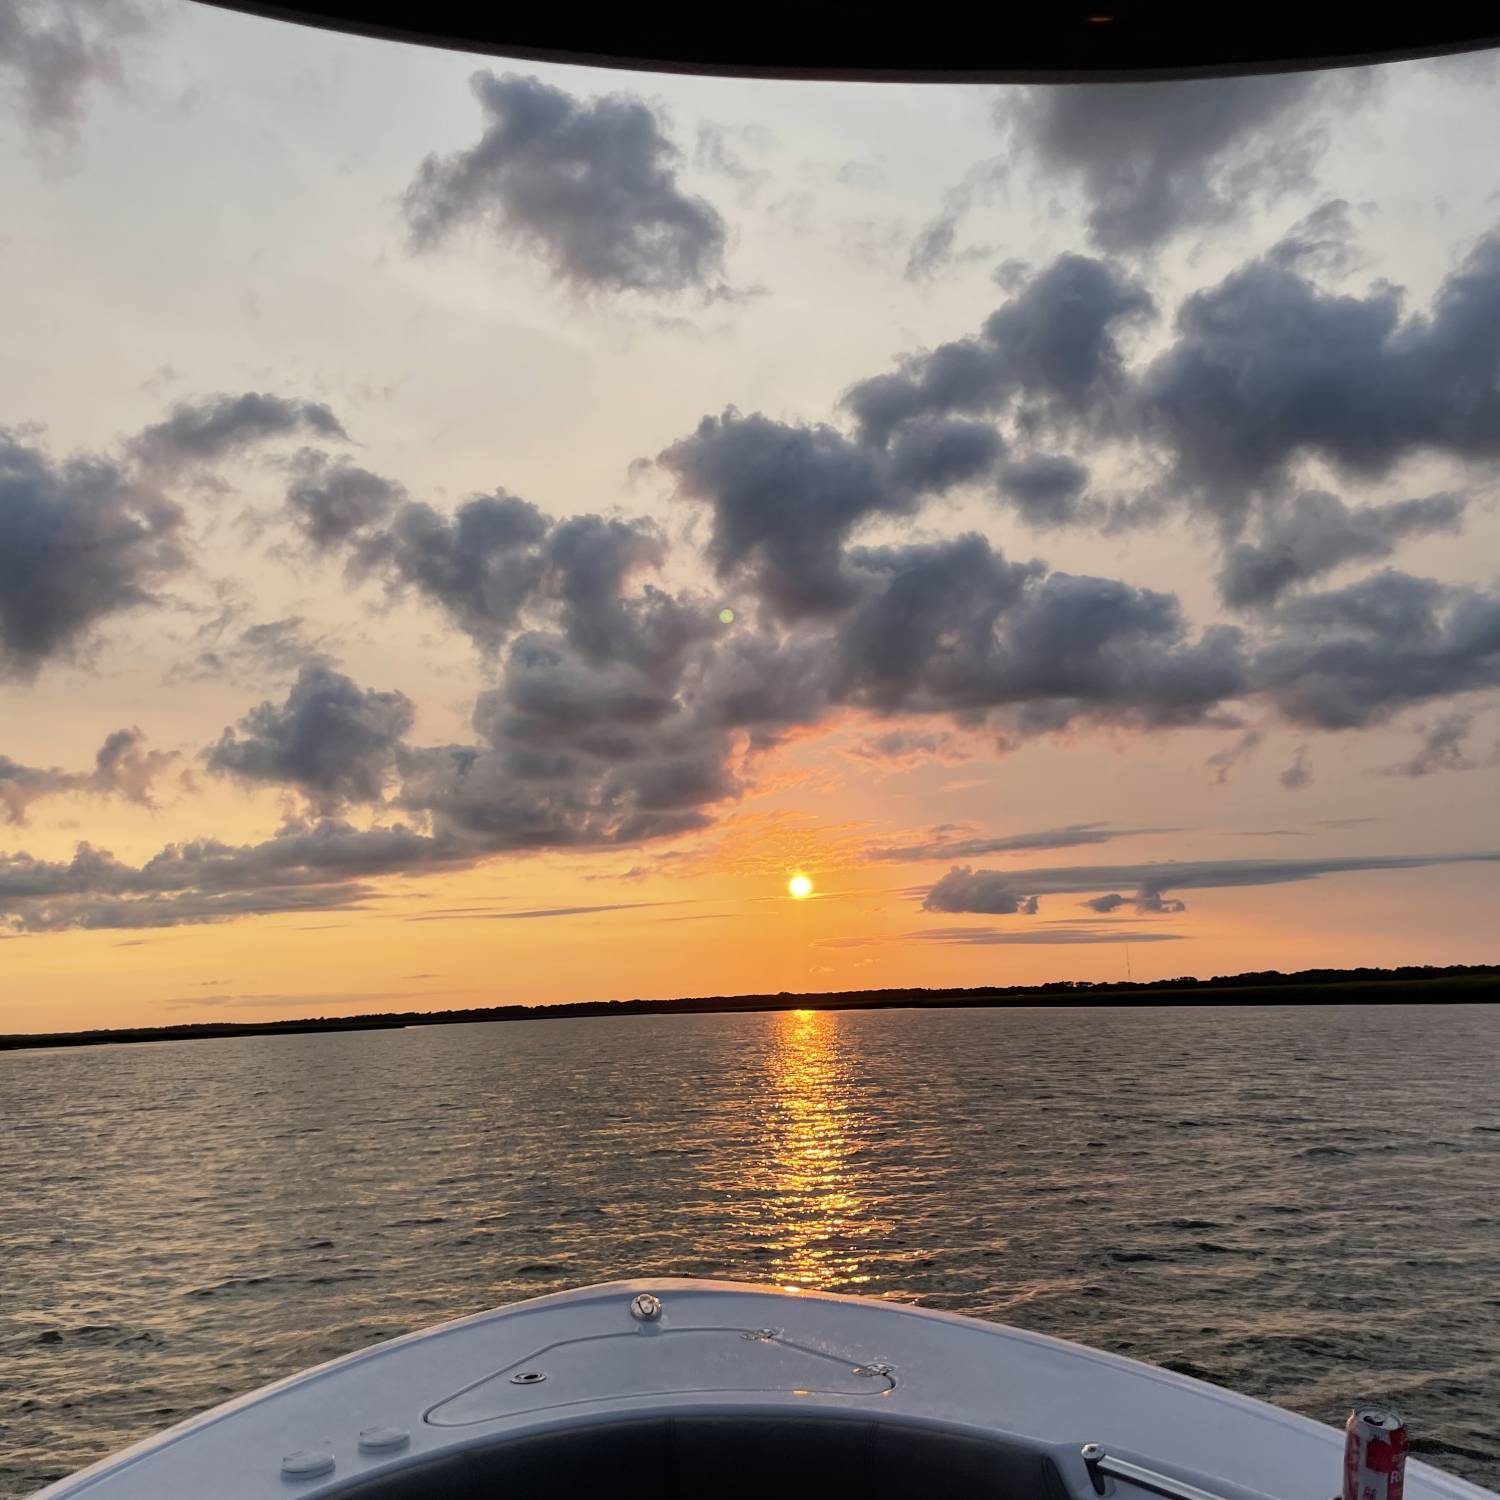 Title: Sun setting on the Heritage - On board their Sportsman Heritage 231 Center Console - Location: Beaufort, South Carolina. Participating in the Photo Contest #SportsmanOctober2021